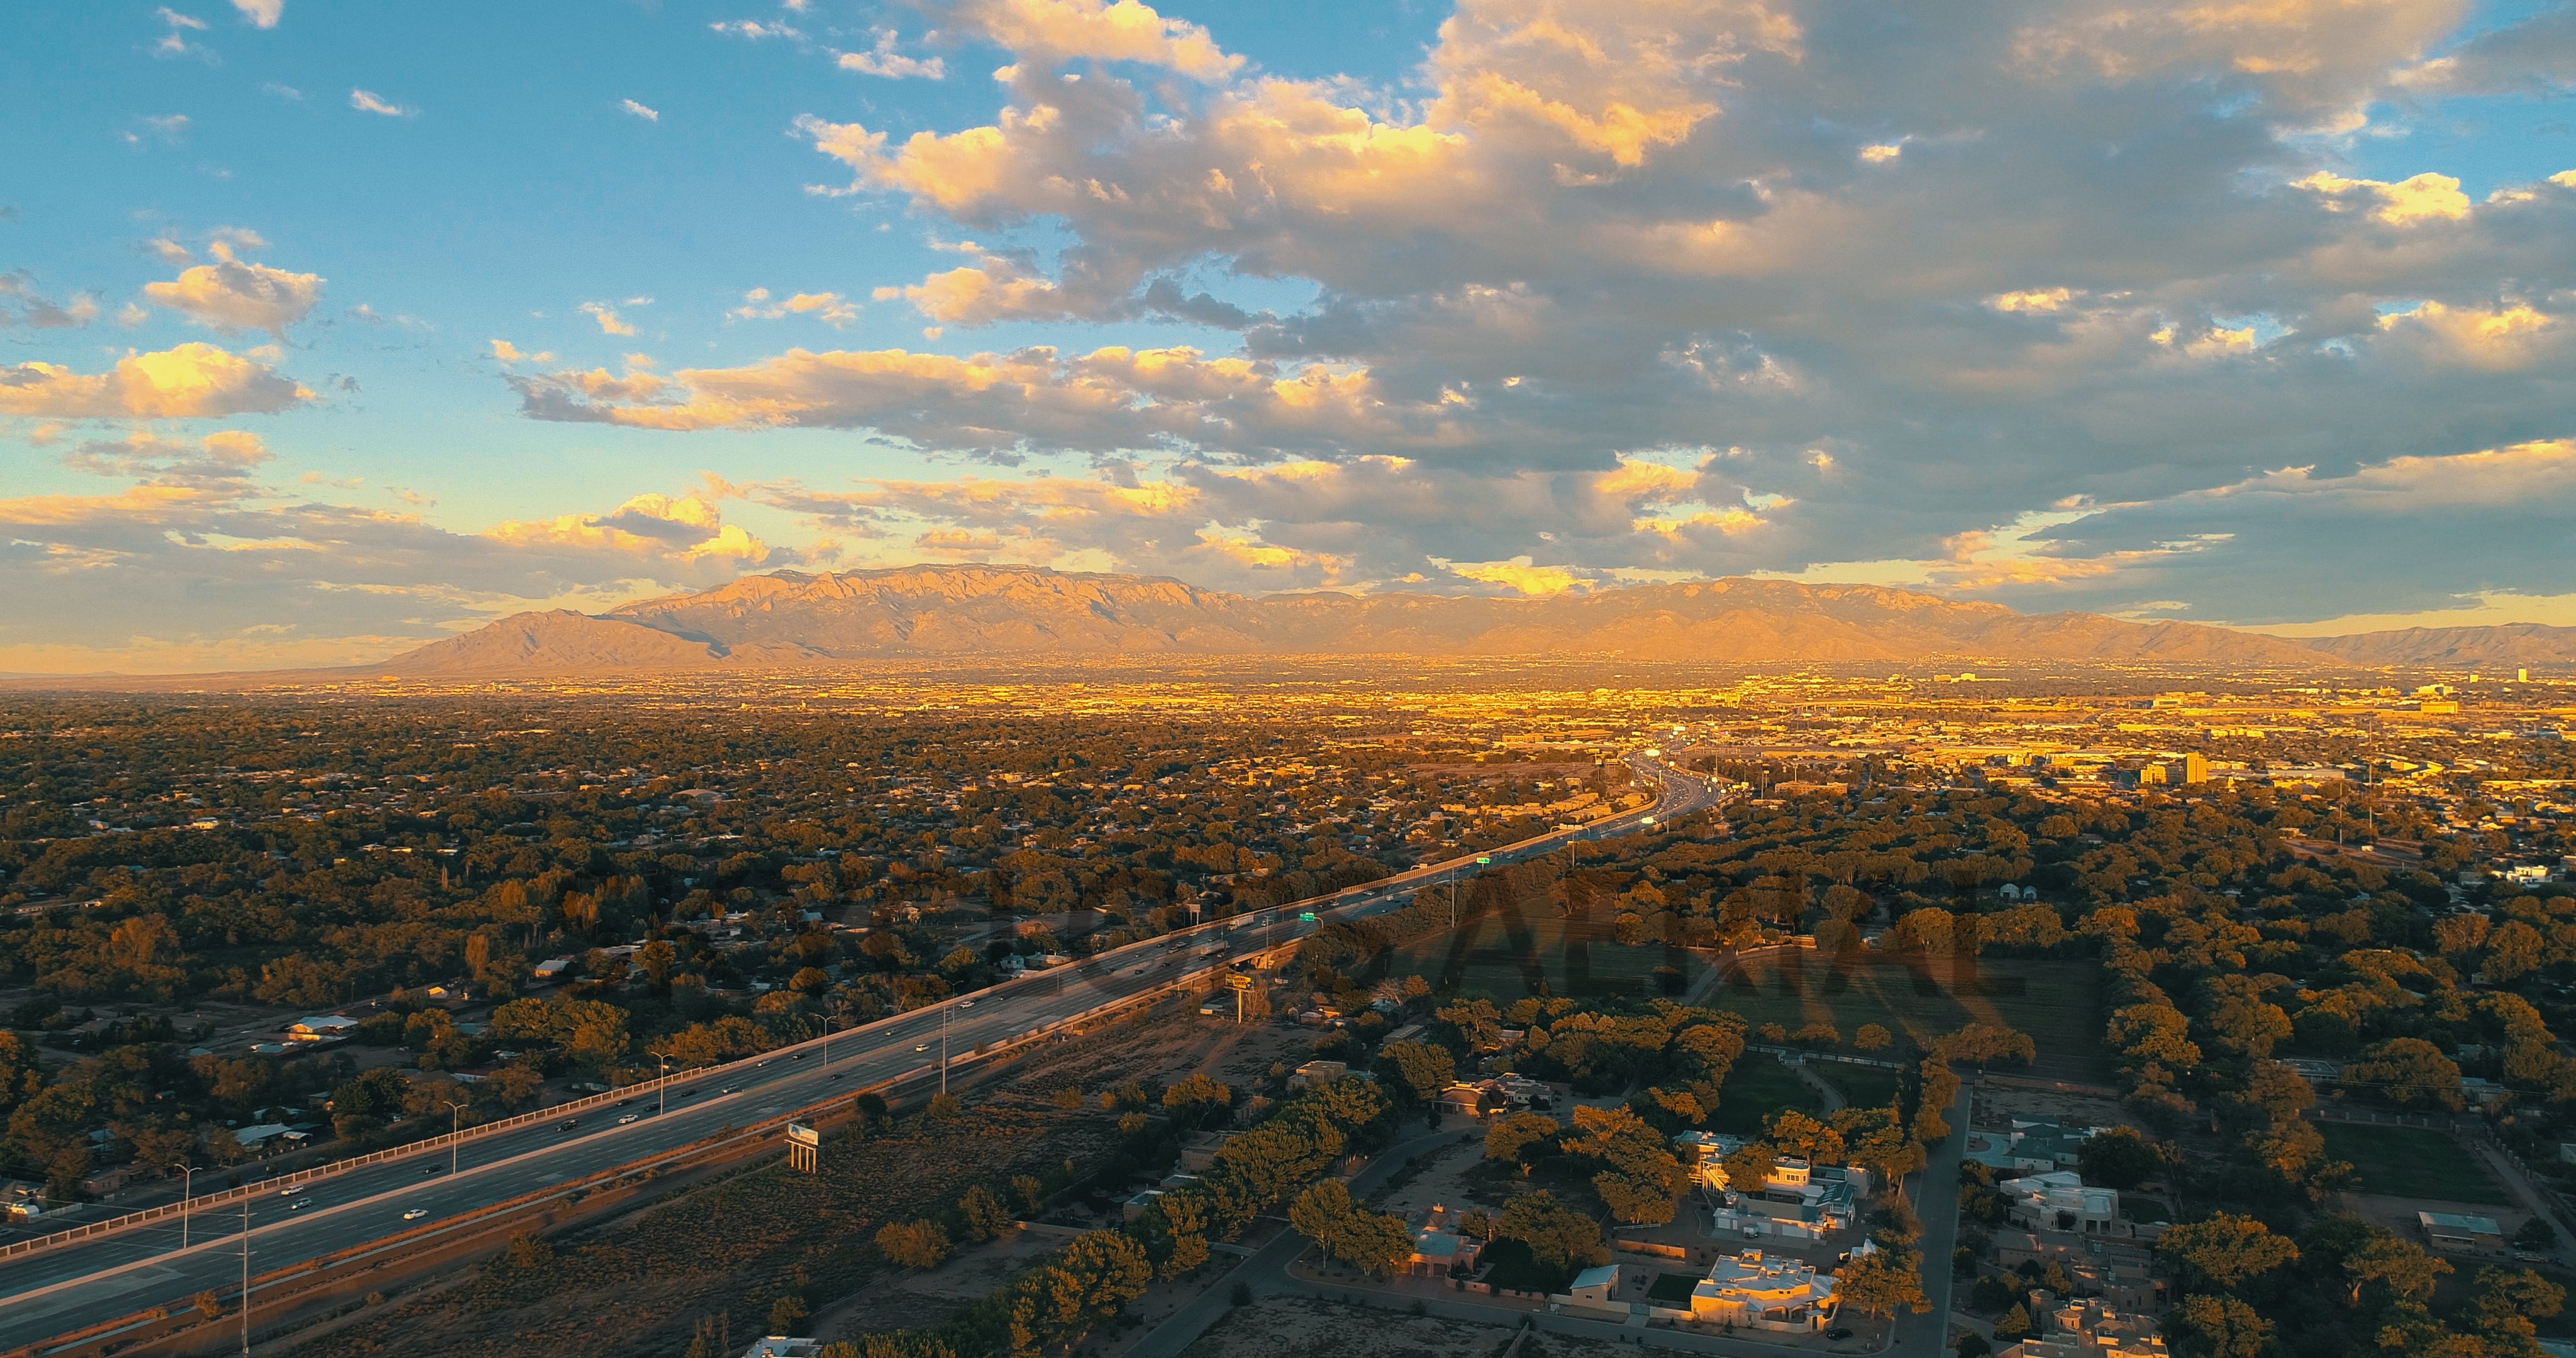 Aerial view of The Sandia Mountains and Albuquerque from I-40 in New Mexico